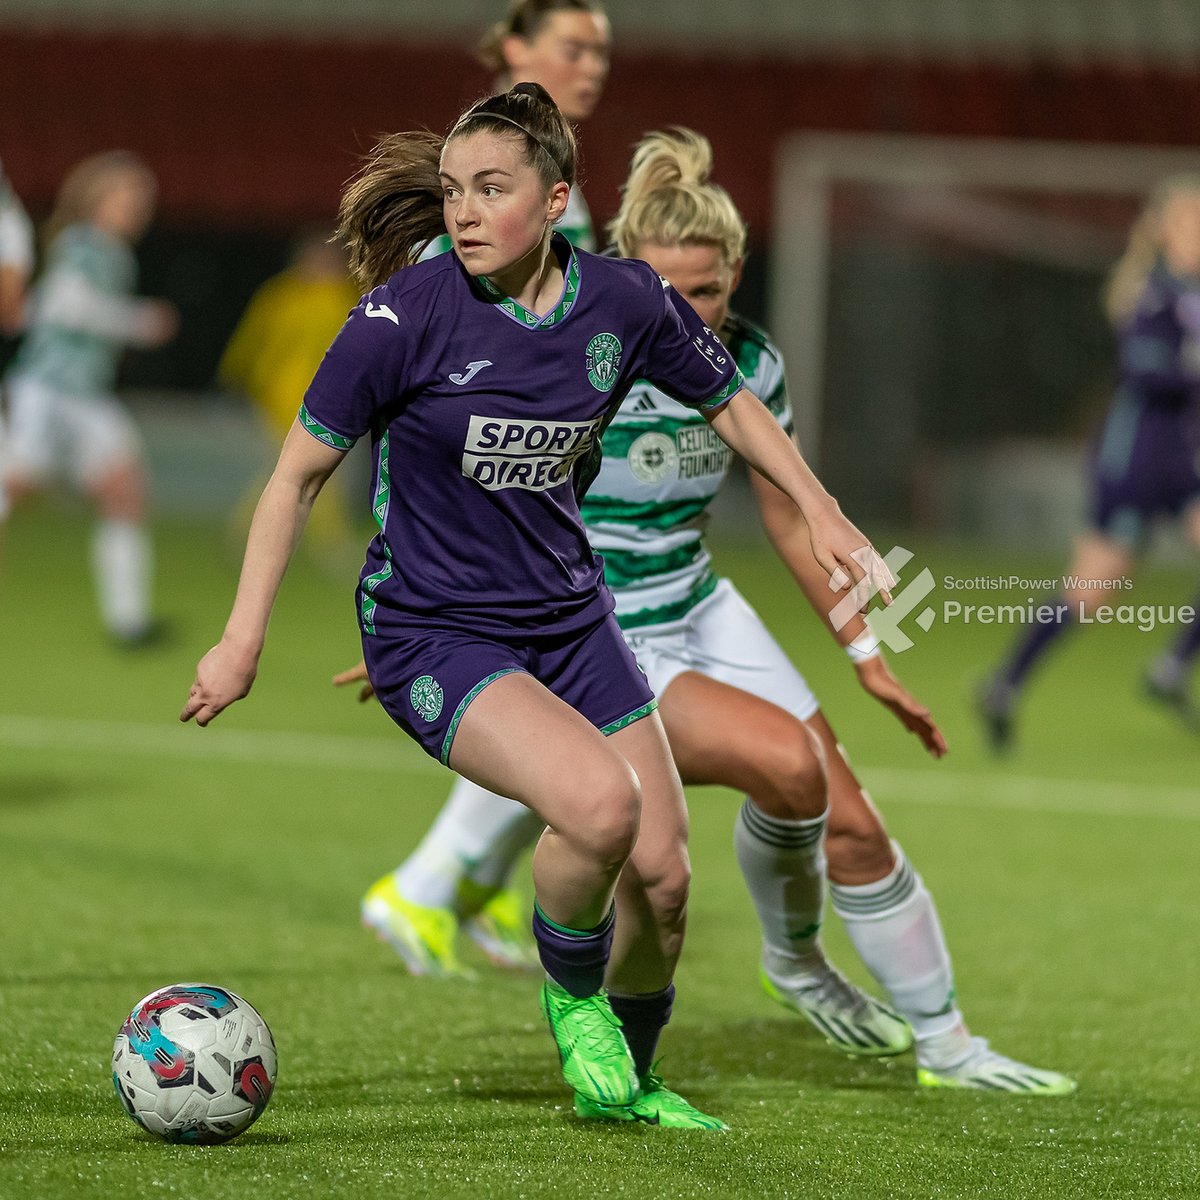 A single goal was enough to give @CelticFCWomen all 3 points and move to the top of the @SWPL through a @caitlin5hayes 1st half header #SWPL #TitleRace #ScottishFootball #Football #FootballPhotographer #FootballPhotography #SportsPhotography #SportsPhotographer